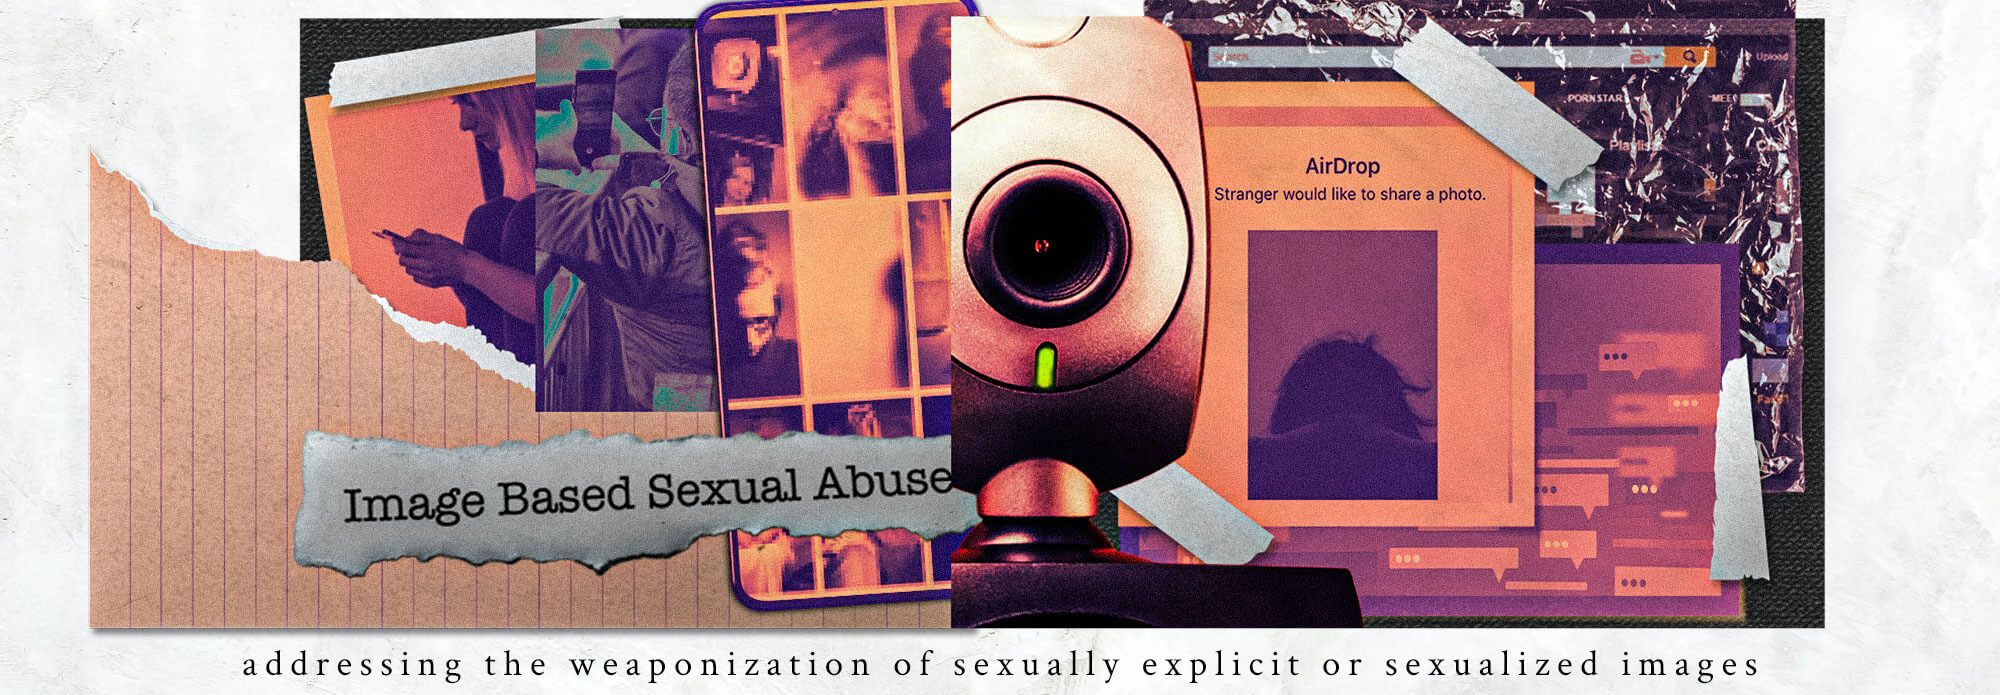 Issues - Image Based Sexual Abuse (IBSA)